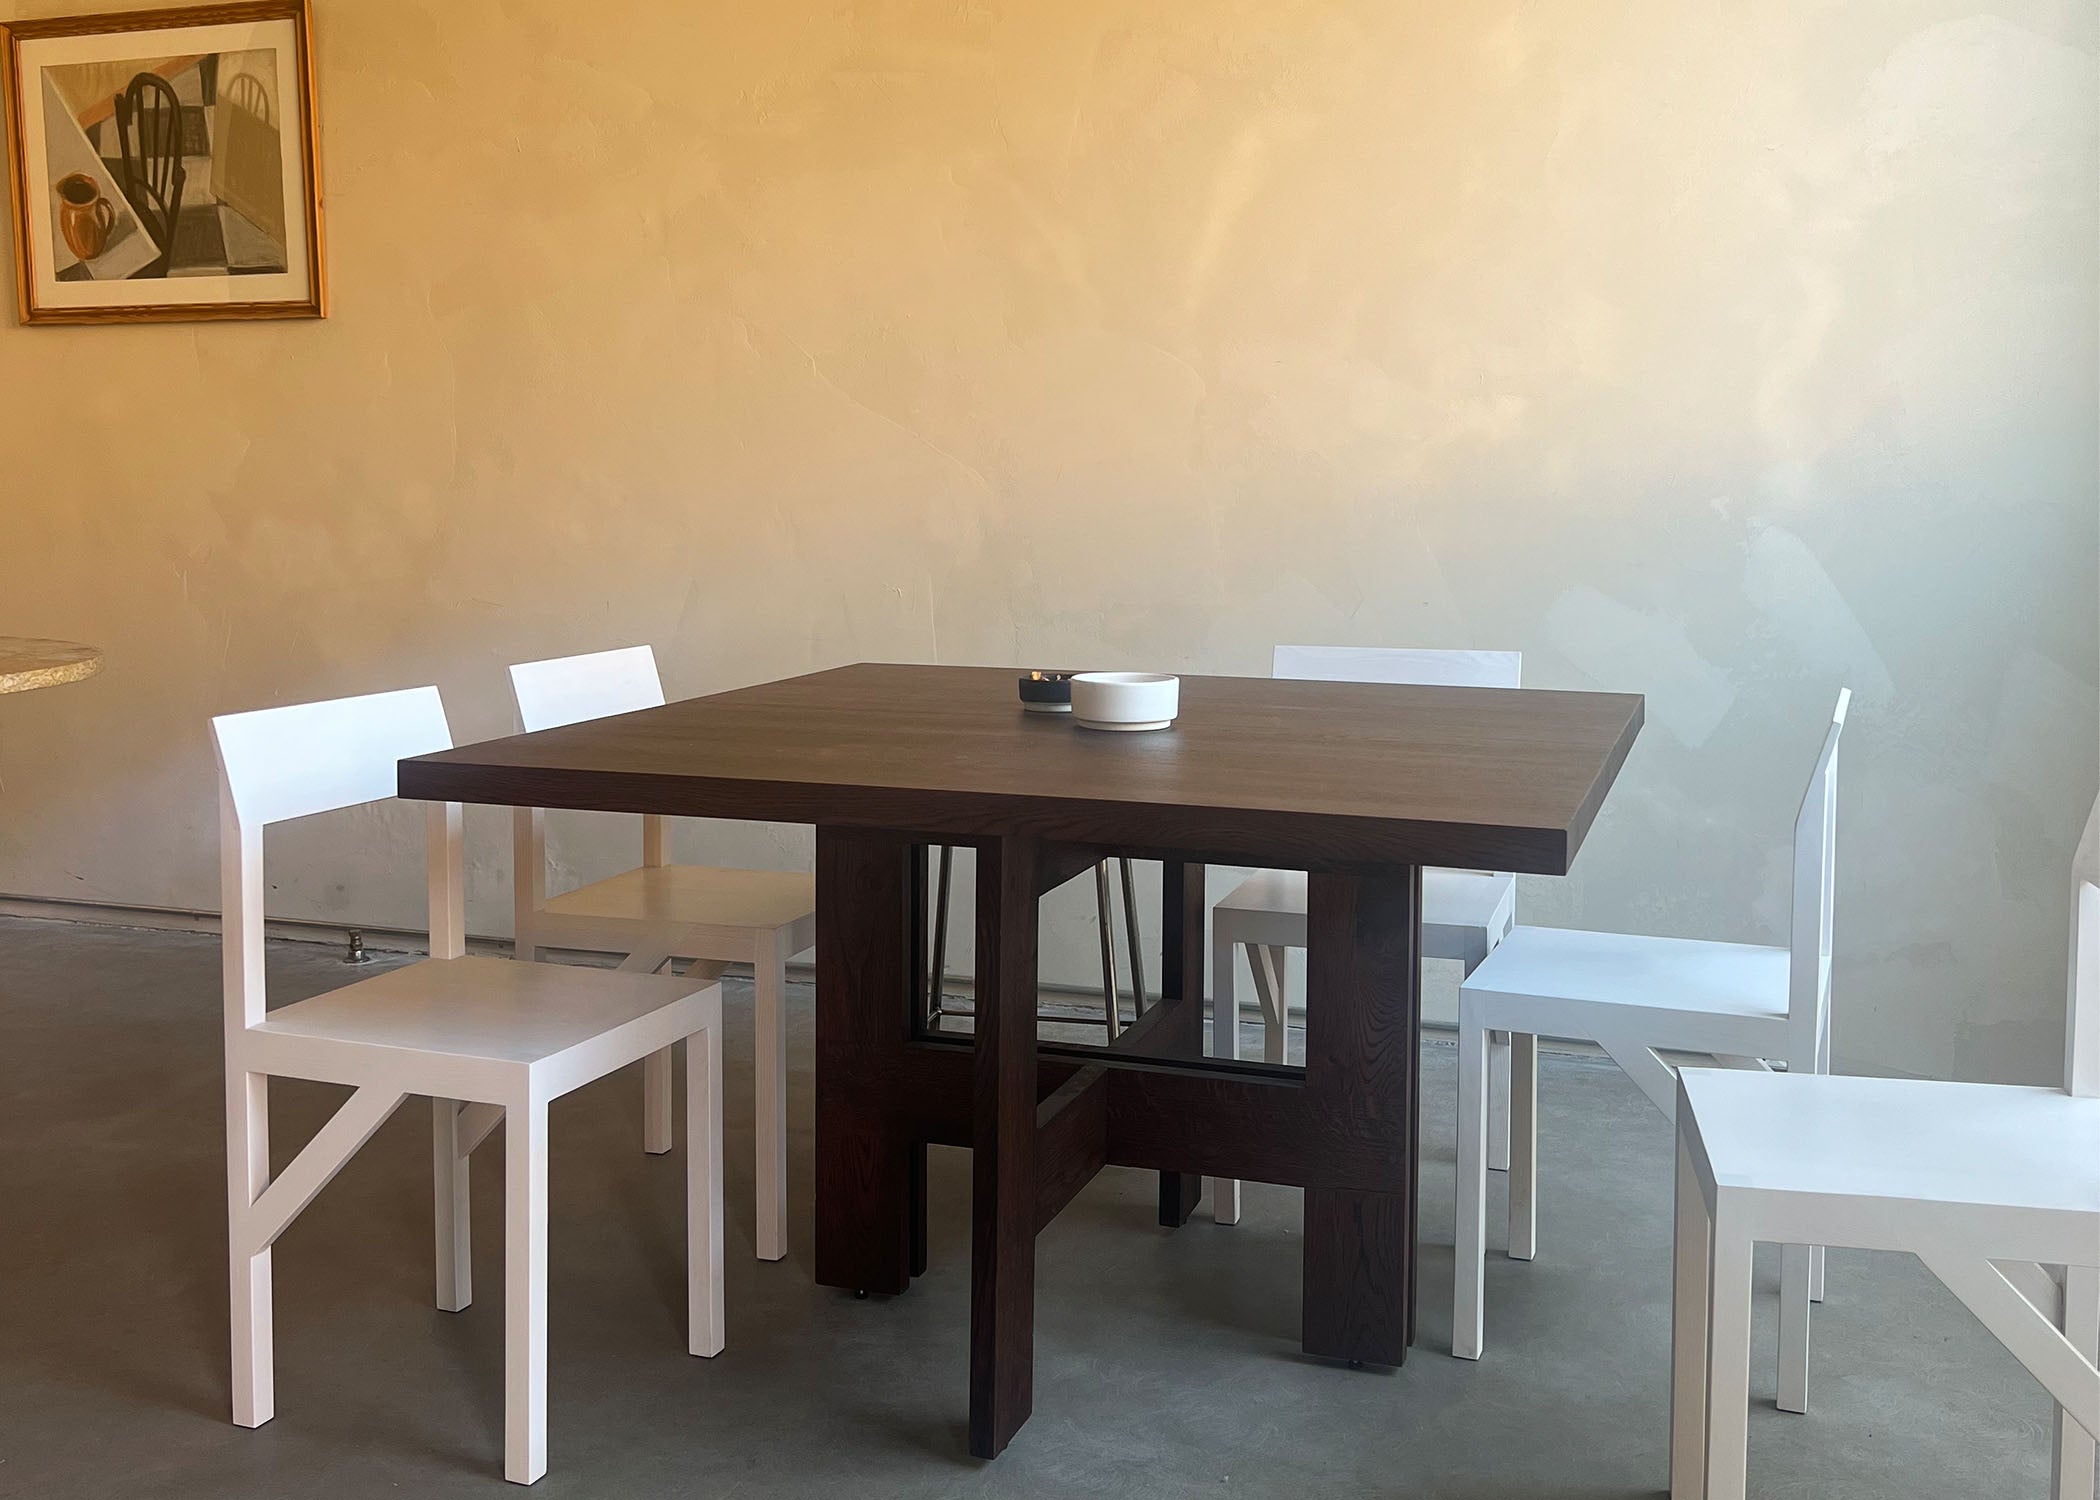 A minimalist modern table and chairs as seen in Copenhagen, Denmark